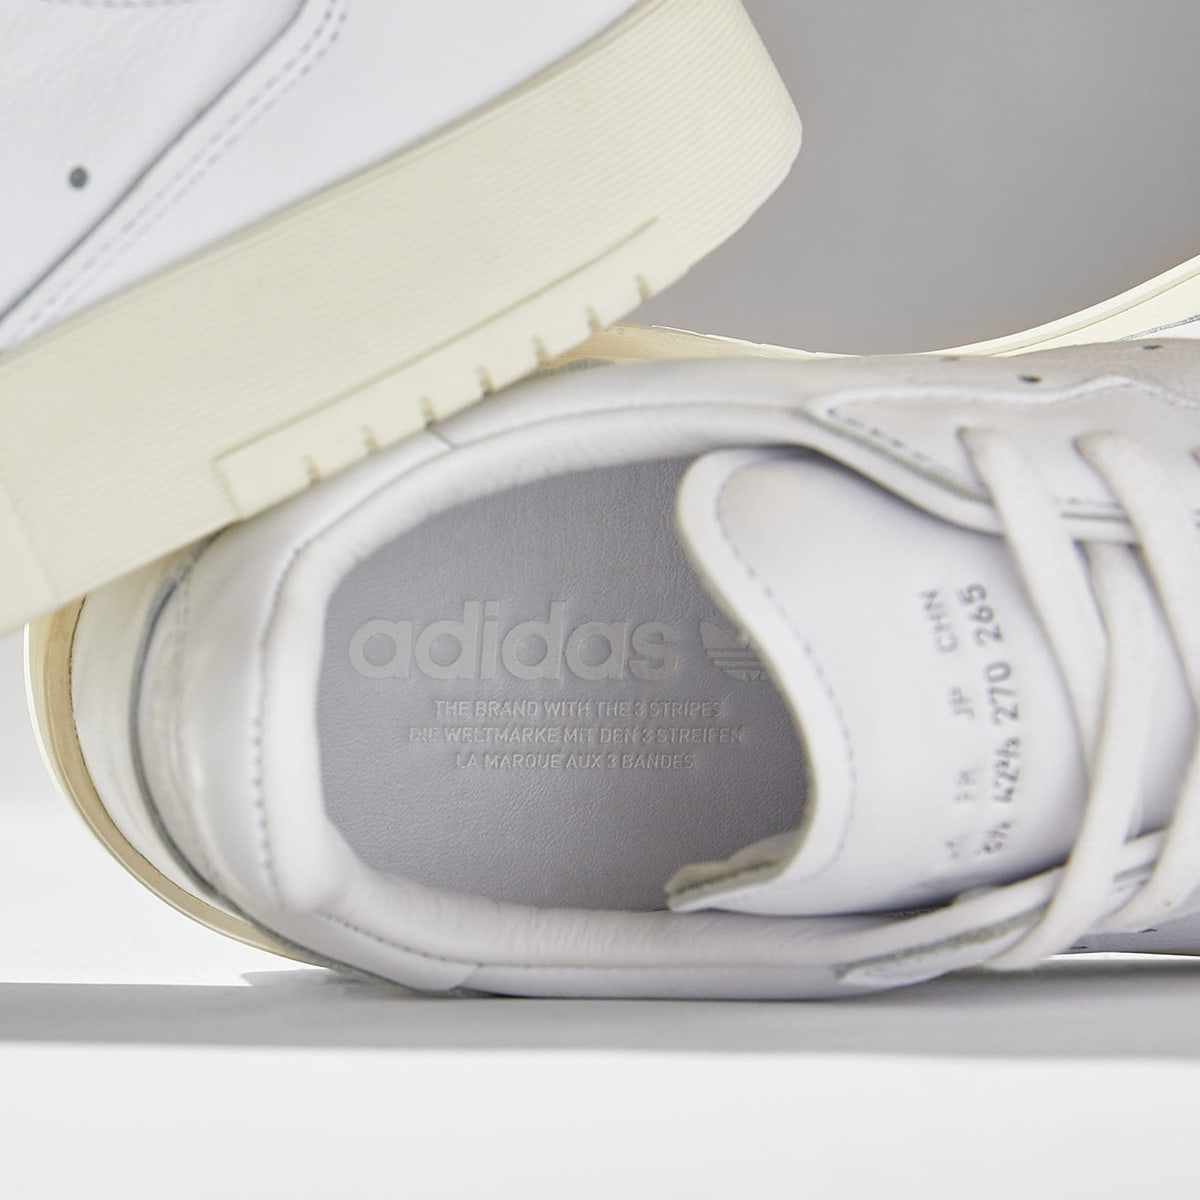 Adidas Supercourt (Crystal White, & Off White) | END. Launches